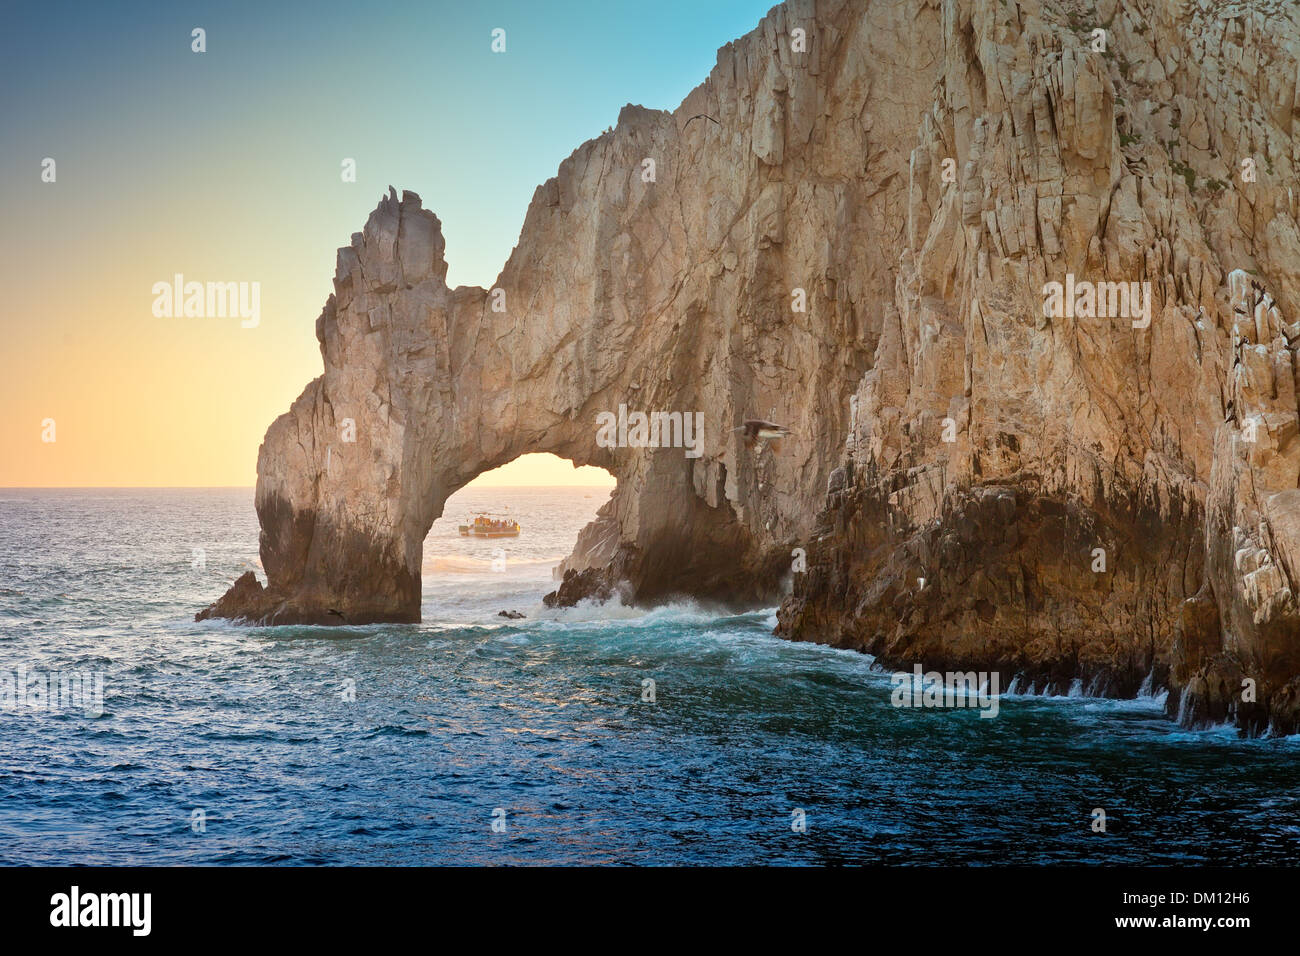 The natural rock formation called the Arch in Cabo San Lucas, Mexico Stock Photo